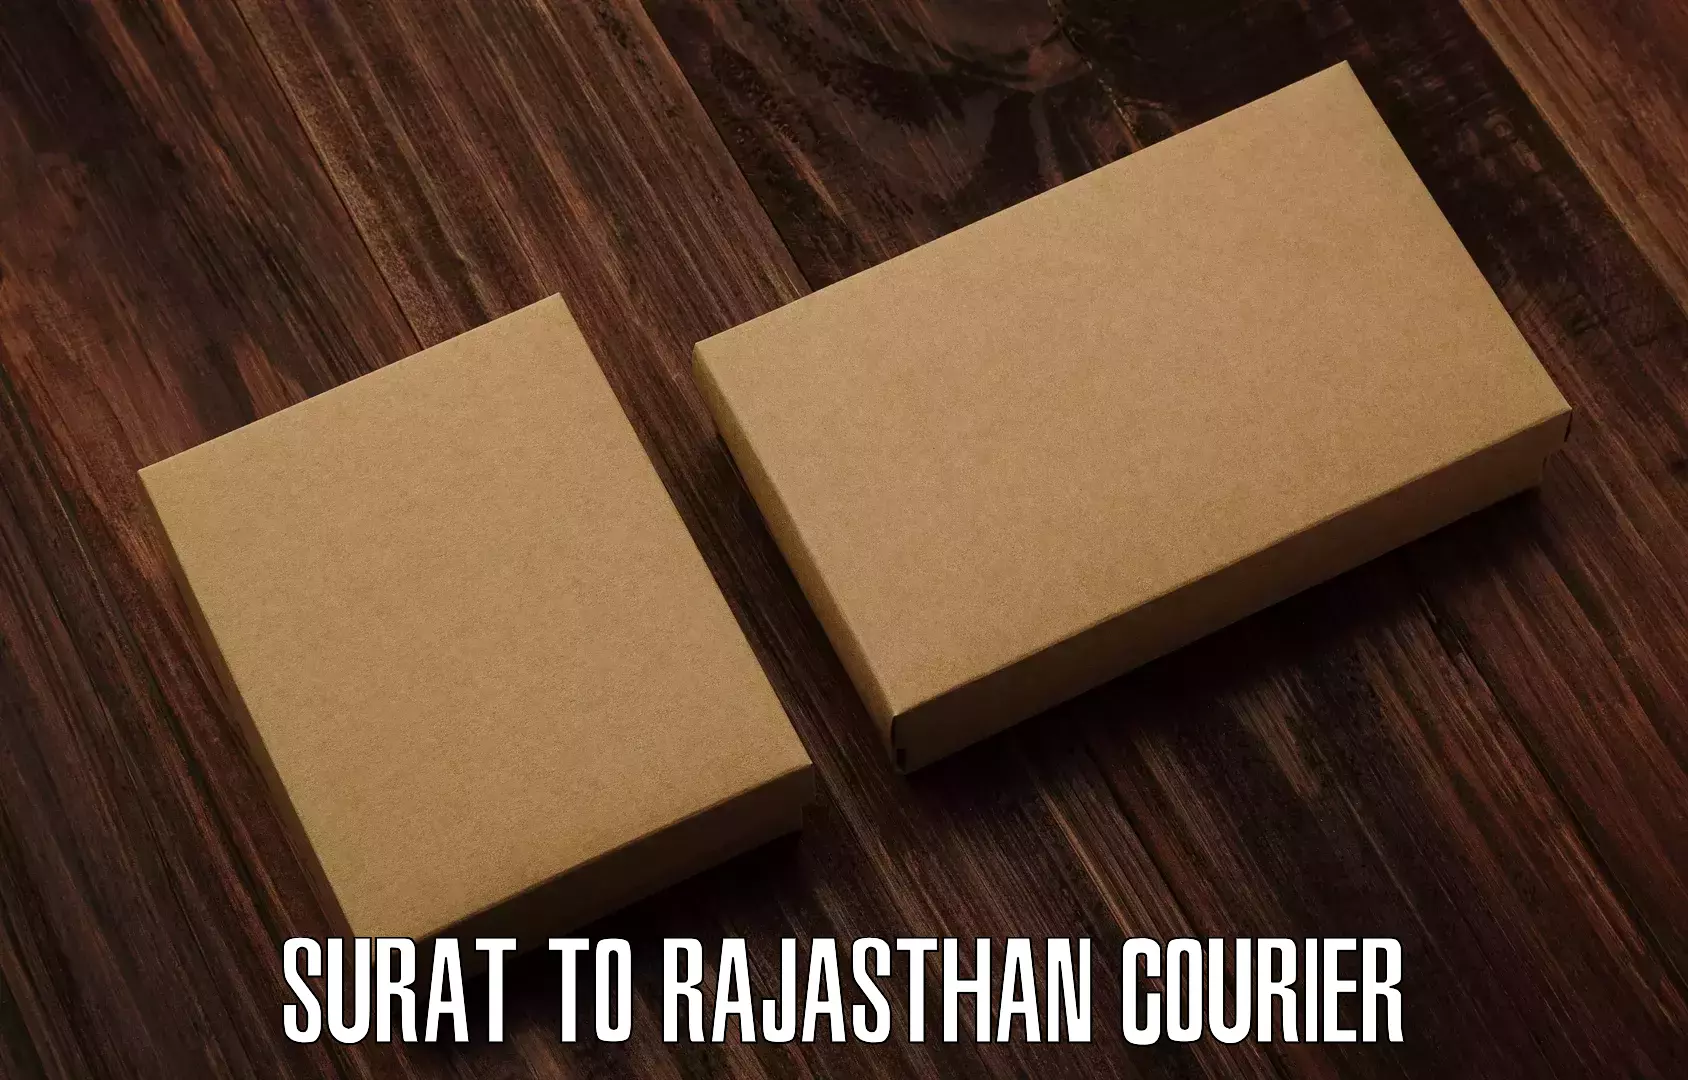 Global shipping solutions Surat to Rajasthan